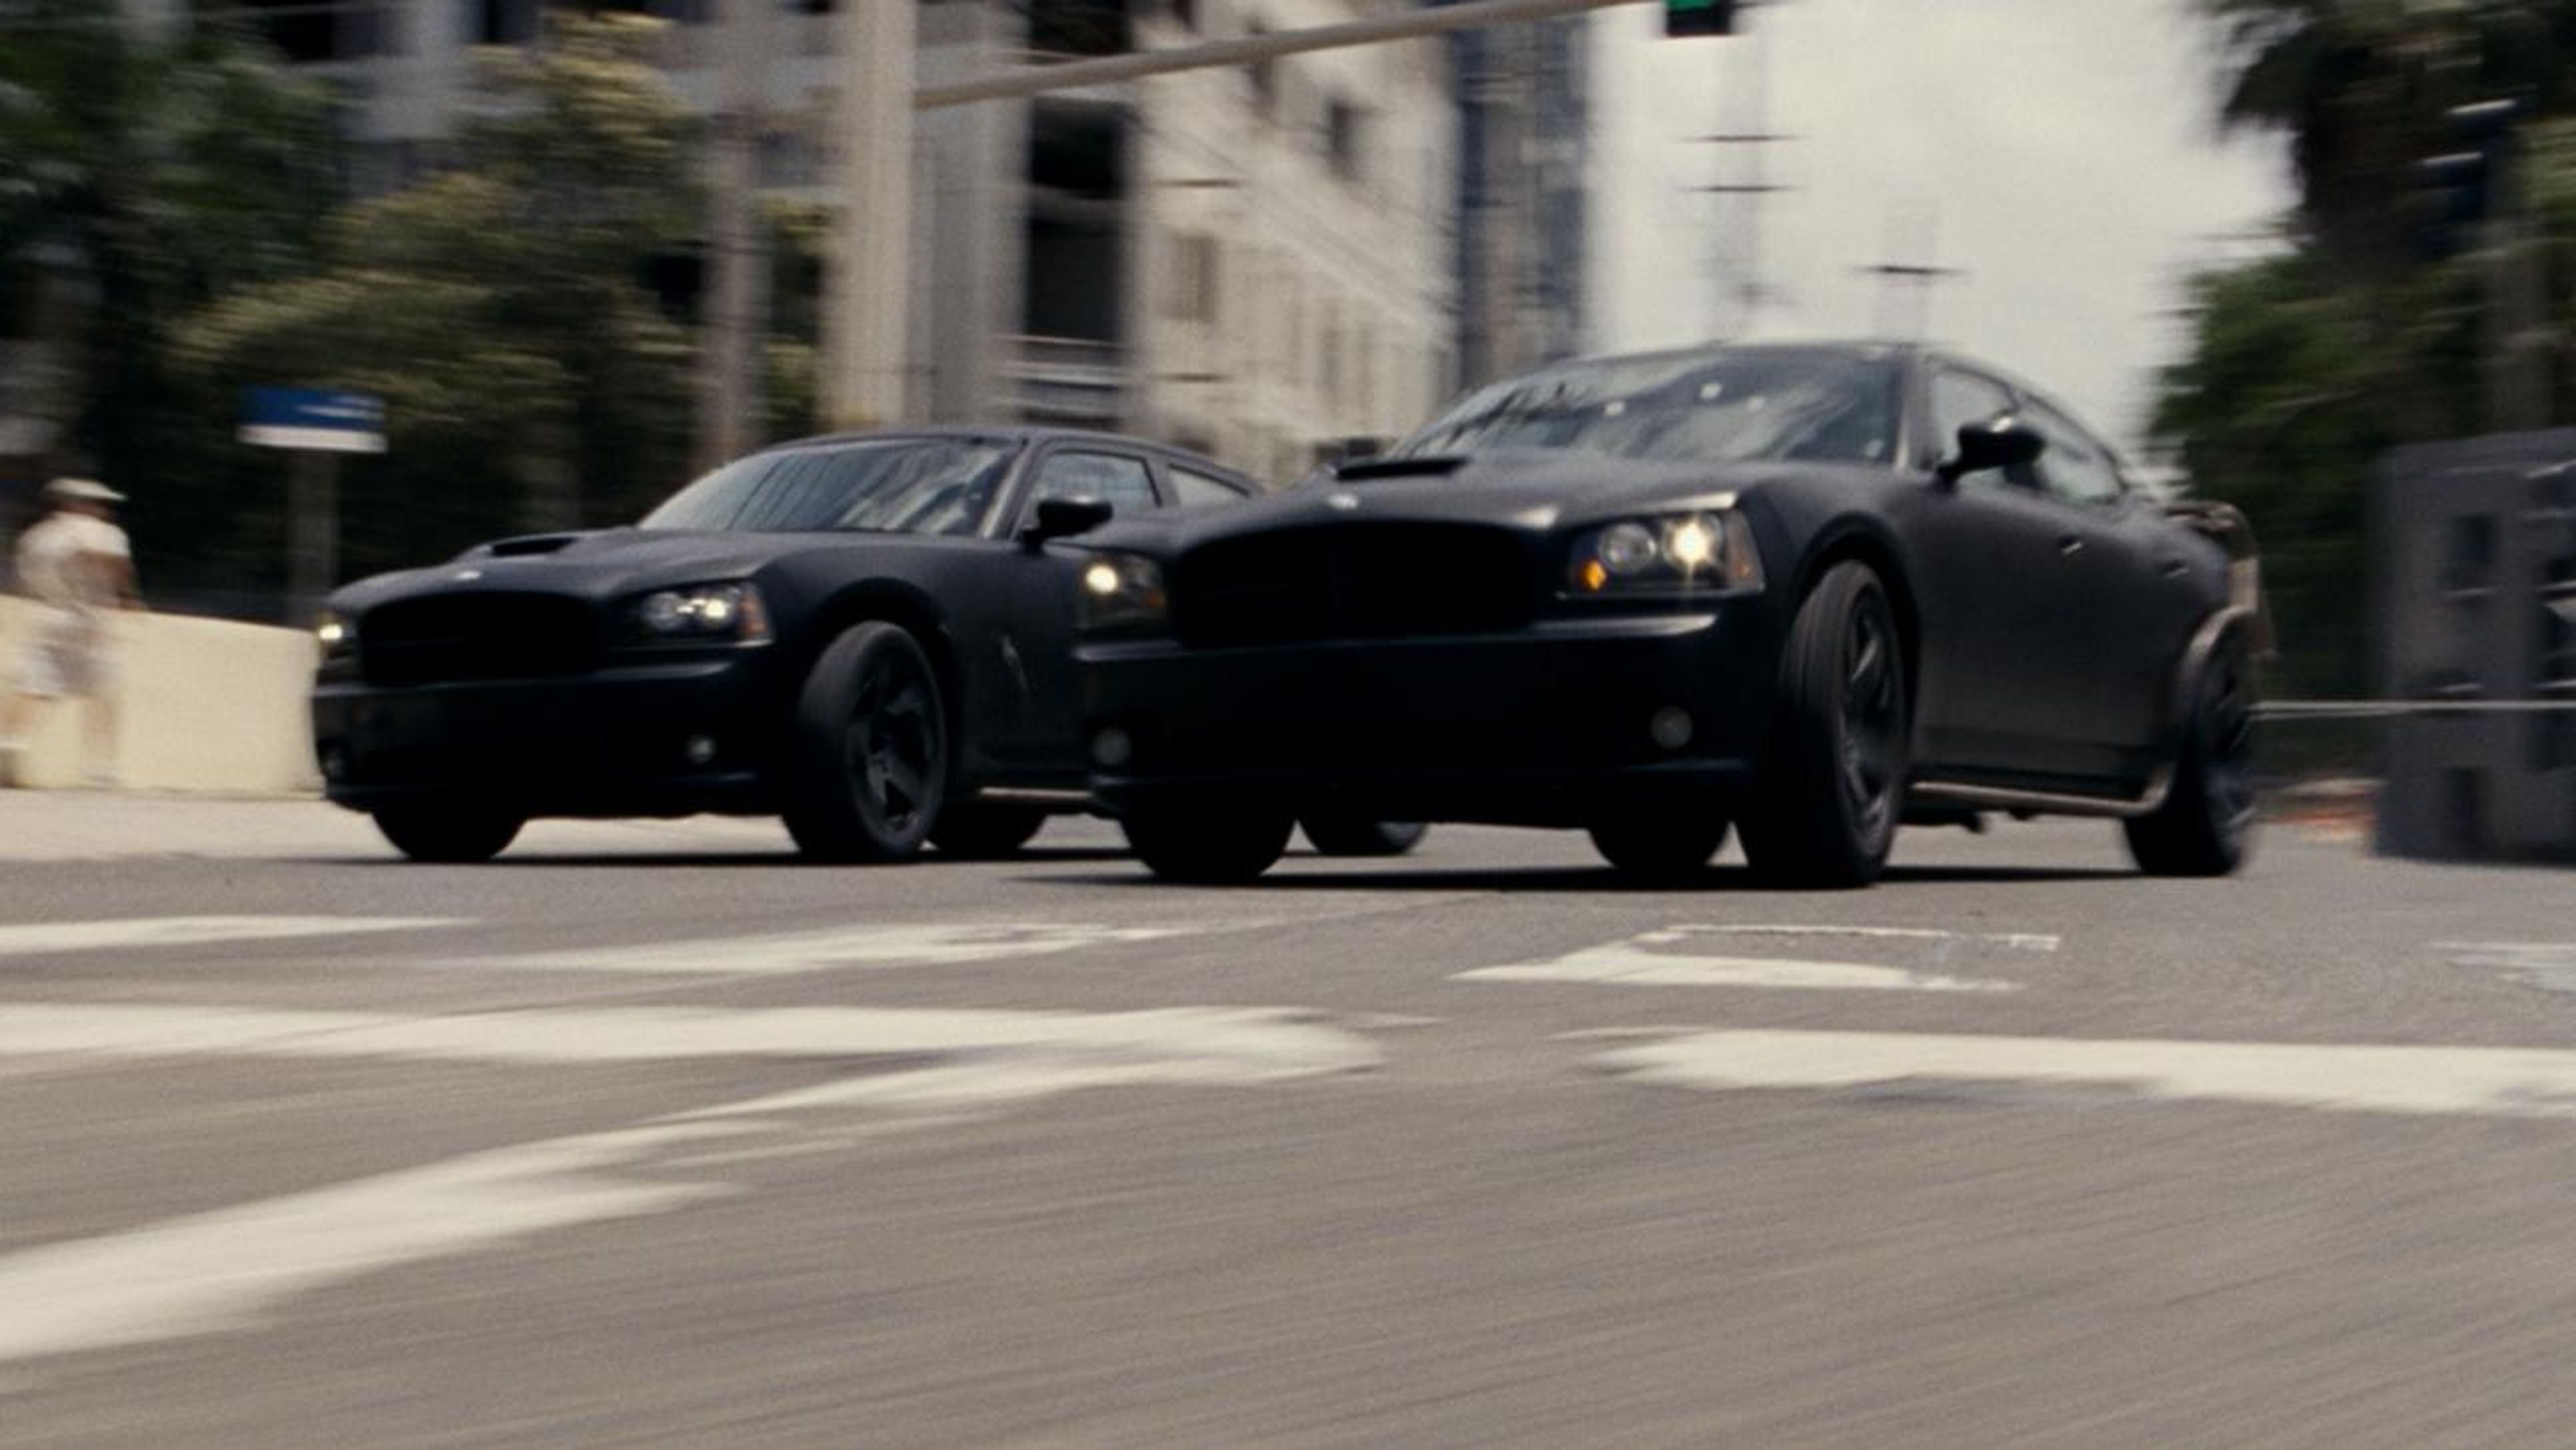 Dodge Challenger - Fast and Furious.